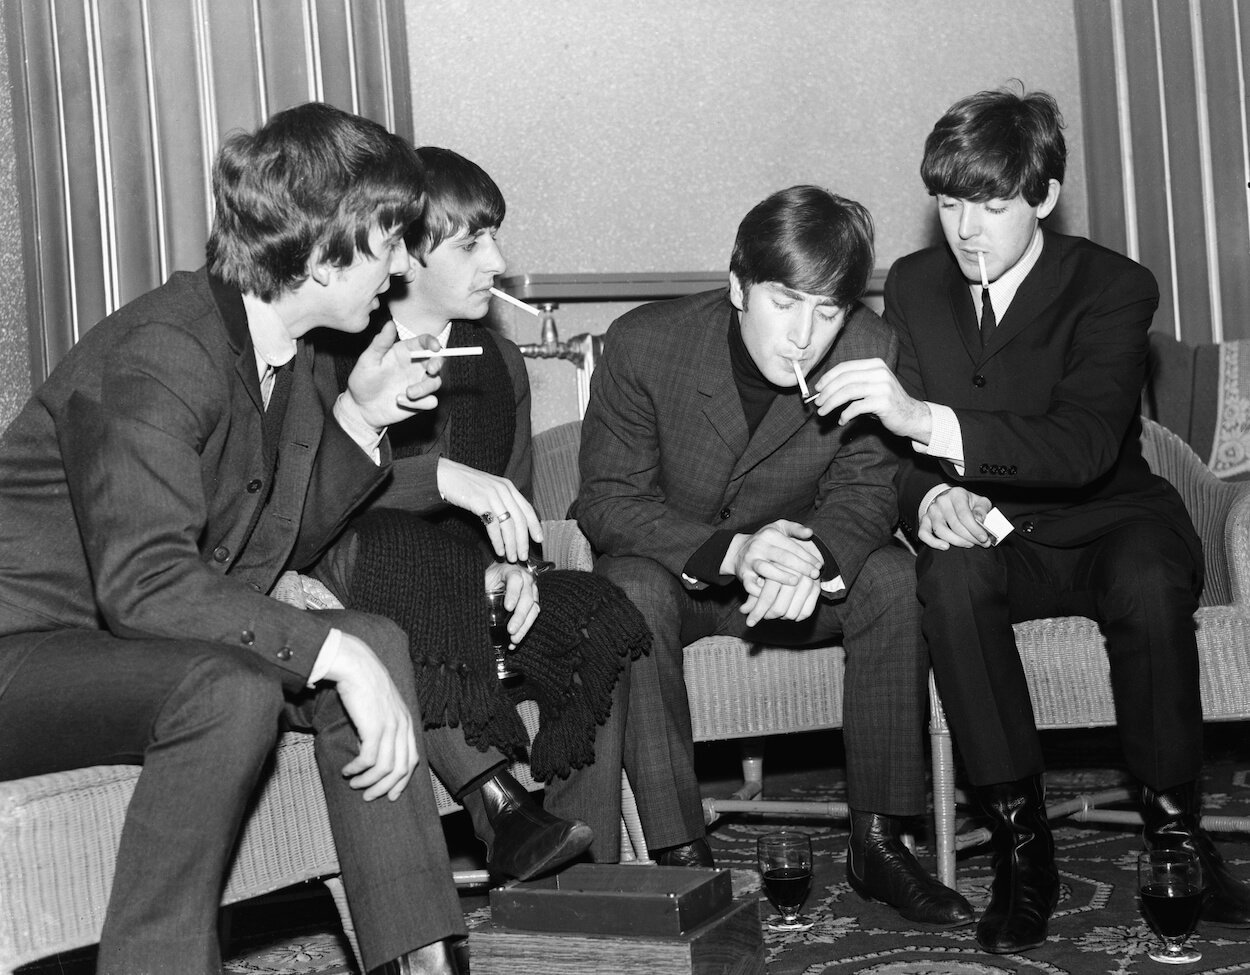 Beatles members (from left) George Harrison, Ringo Starr, John Lennon, and Paul McCartney sitting and smoking cigarettes backstage in 1963.